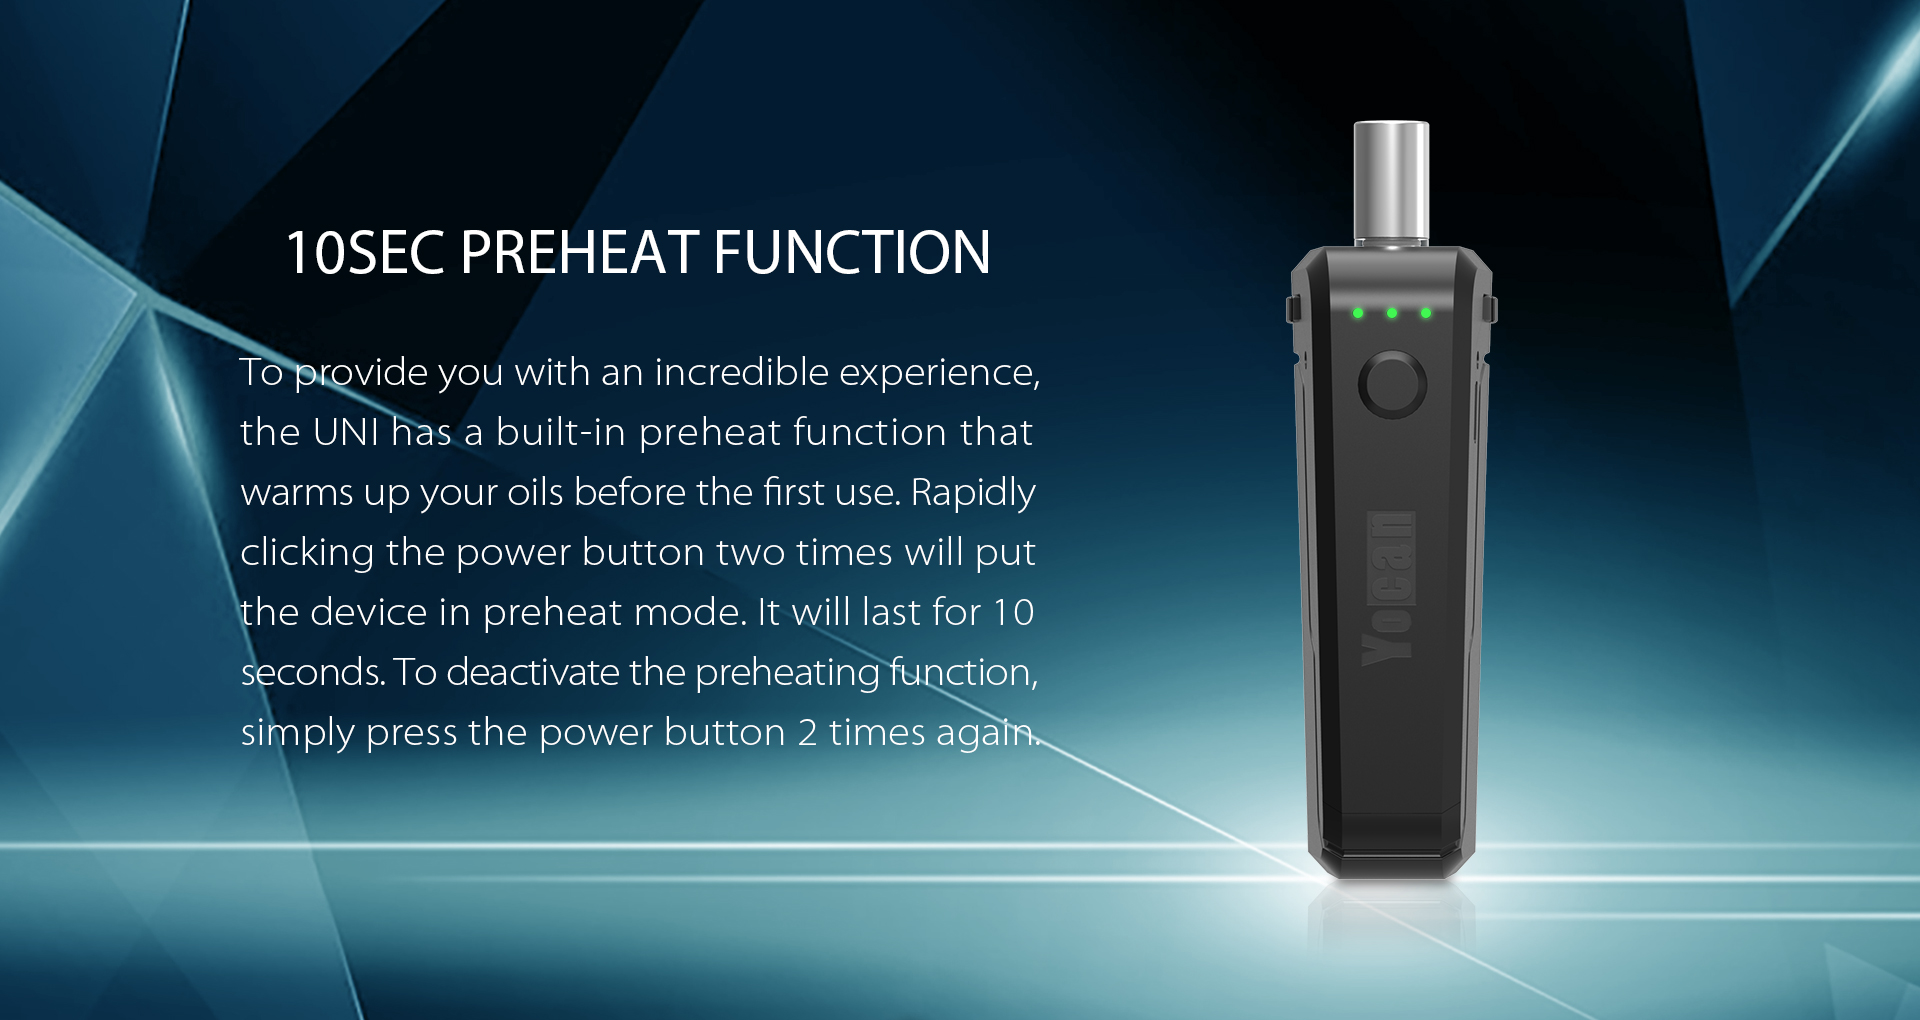 Yocan UNI 10sec preheat function provides you with an incredible experience